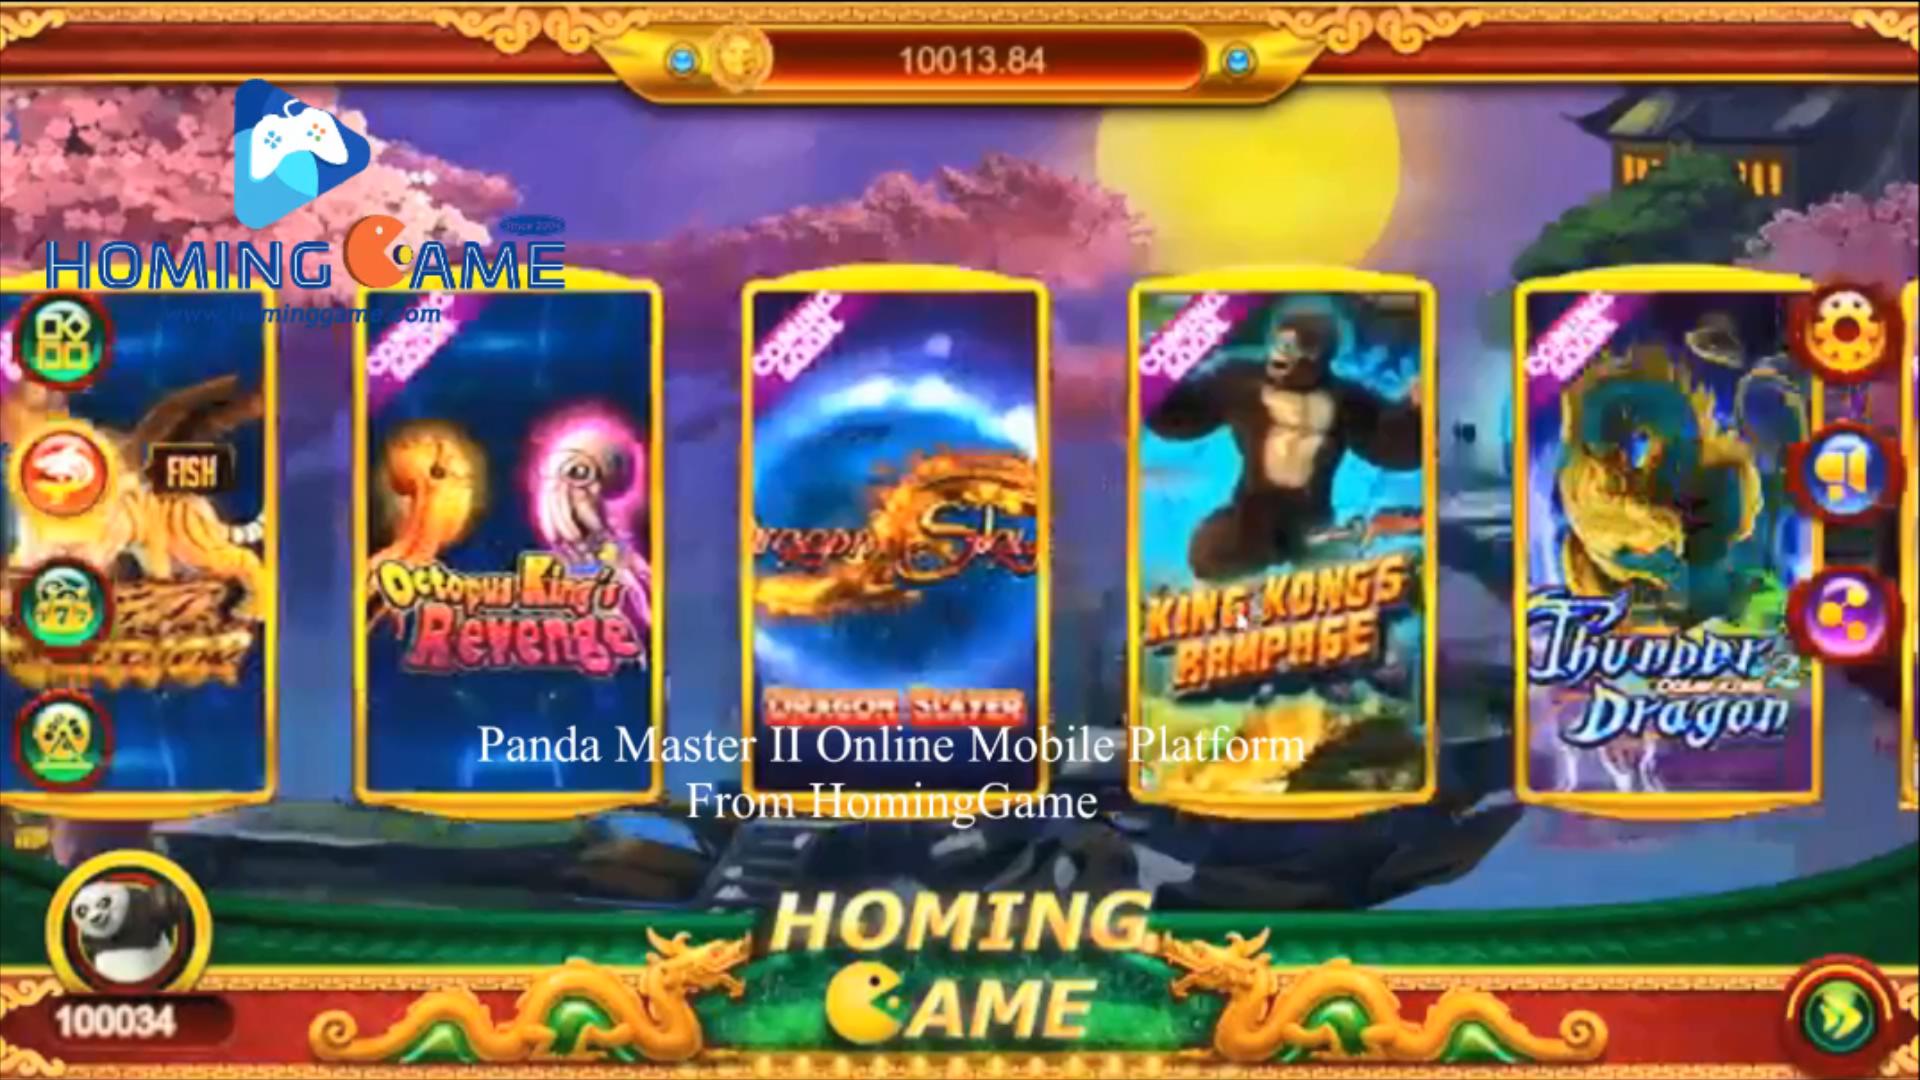  2022 Latest Online Platform HomingGame Panda Master 2 online mobile Gaming Panda Master II Online mobile fishing game(Order call whatsapp:+8618688409495),panda master online game,panda master online mobile game,panda master online mobile game,download panda master online gaming apps,MysteryDragons online gaming,MysteryDragons online slot gaming,online fishing game apps,online slot game apps,online gaming system,usa best online fishing game apps,download online fishing game apps,download online slot game apps,download online gaming system,USA best fishing table game machine supplier and manufacturer by HomingGame Specialize in manufacture fishing Game(Order Call Whatsapp:+8618688409495),fishing game,fishing table,fishing table game machine,fishing game machine,fishing arcade game machine,fish hunter fishing game machine,upright table fishing game machine,standup fishing game machine,ocean king 3 fishing game machine,capatian america fishing game machine,tiger stirke fishing game machine,godzilla fishing game machine,rampage fishing game machine,dragon legend fishing game machine,ocean king,igs fishing game machine,electrical fishing game machine,usa fishing game machine,ocean king 2 fishing gam emachine,fishing game machine supplier,fishing game machine manufacturer,gaming machine,gambling machine,game machine,arcade game machine,coin operated game machine,indoor game machine,electrical game machine,amusement park game equipment,amusement machine,gaming,casino gaming machine,usa fishing game machine supplier,USA fishing table game machine manufacturer,fishing game cheats,fishing game skills,how to paly the fishing game machine,fishing game decoding,fishing game decoder box,hominggame,www.gametube.hk,hominggame fishing game,entertainment game machine,family entertainment game machine,arcade game machine for sale